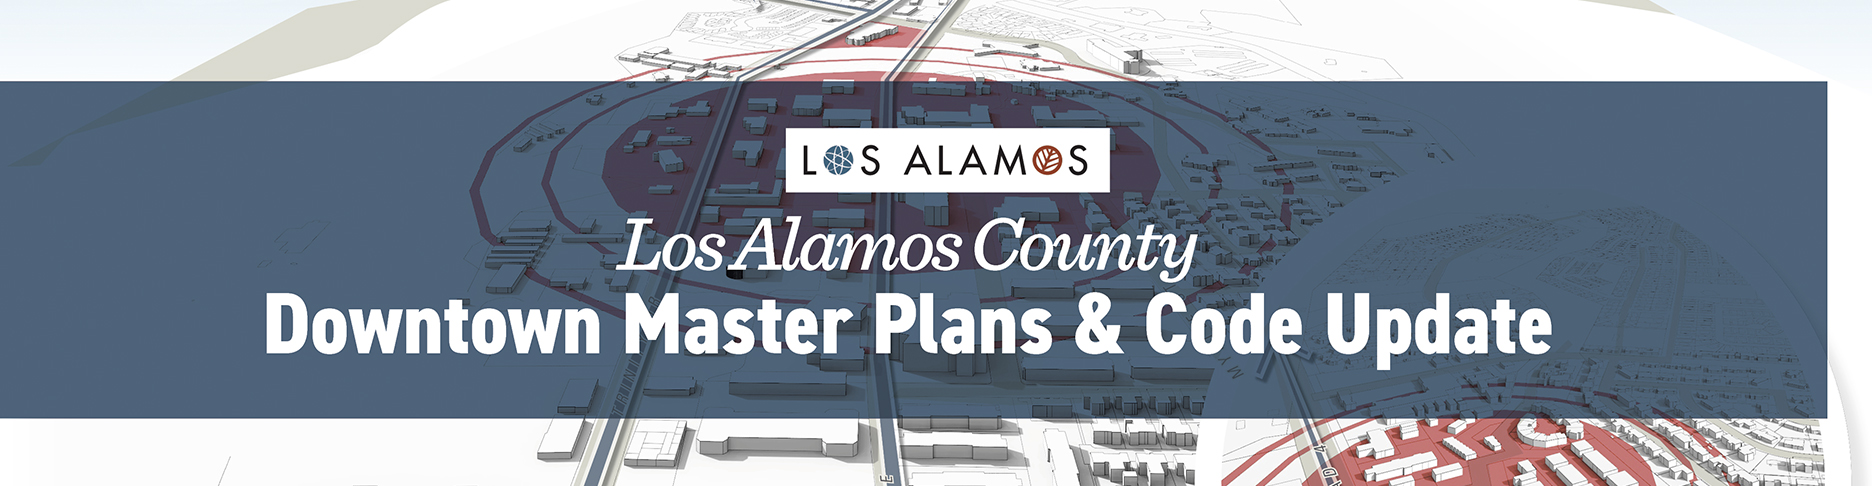 Los Alamos County Downtown Master Plans and Code Update Cover Image 1